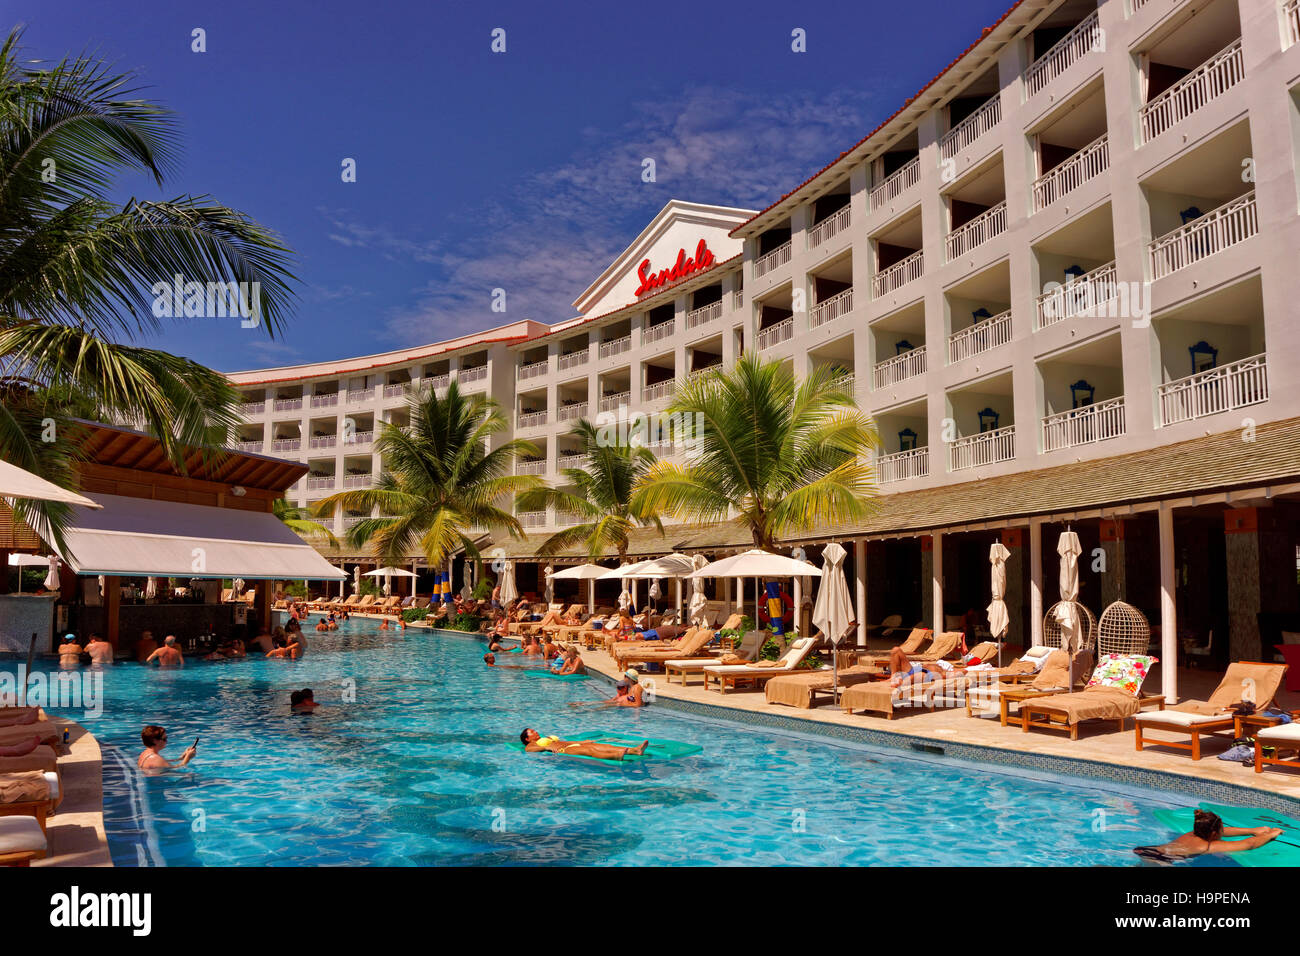 Main building and pool of the Sandals Resort Hotel, St. Lawrence Gap, South Coast, Barbados, Caribbean. Stock Photo